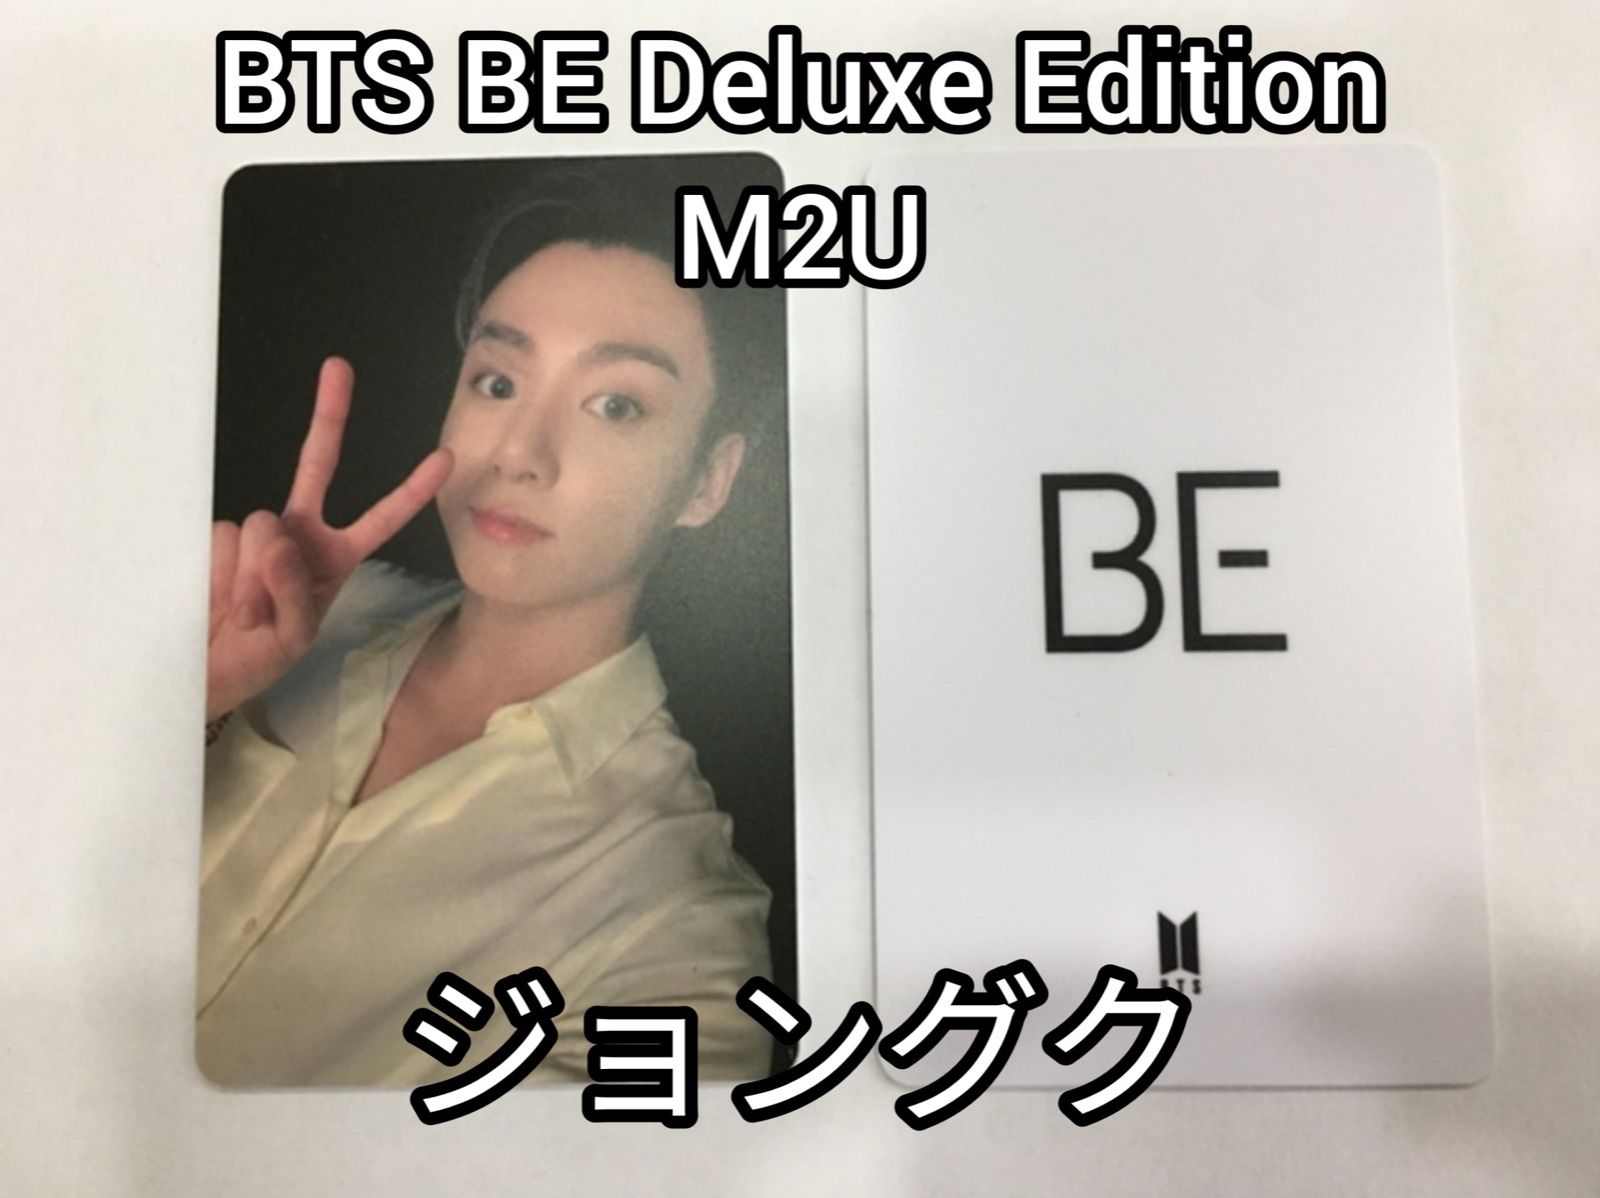 BTS BE deluxe edition ラッキードロー ラキドロ ジョングク